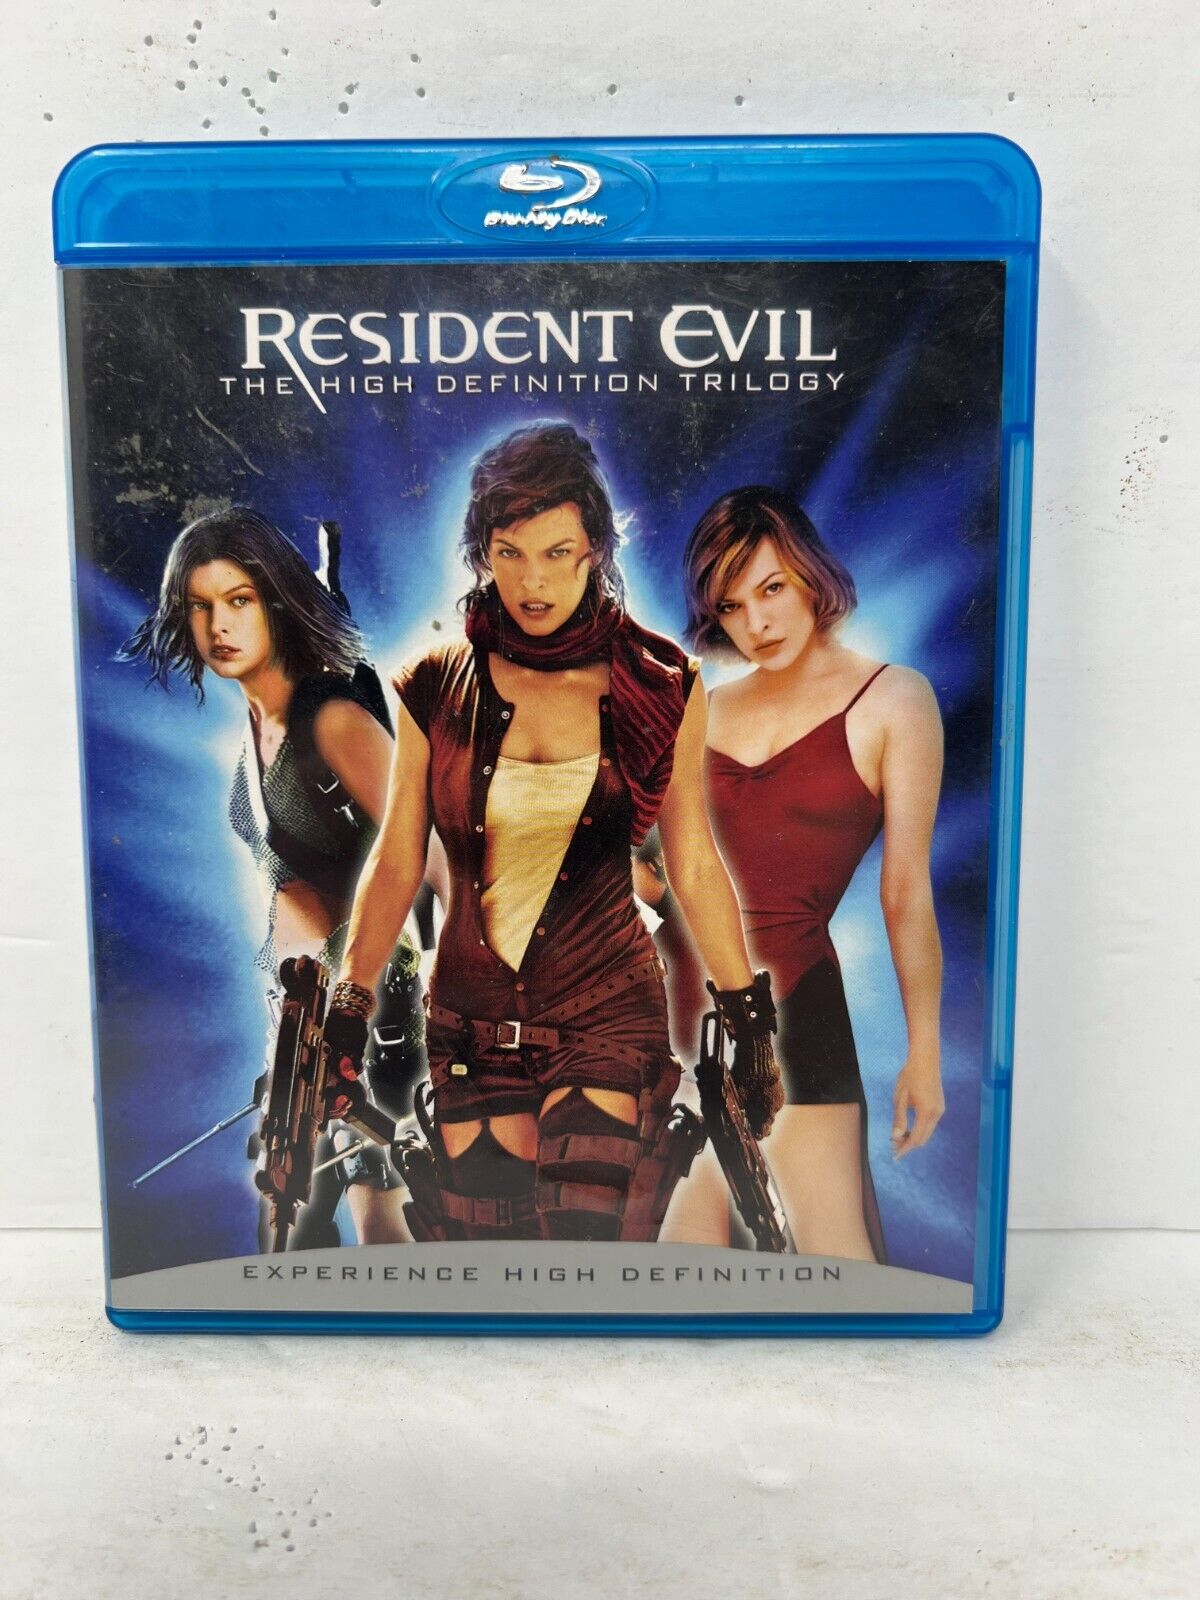 Resident Evil: The High Definition Trilogy (Blu-ray) Horror Good Condition!!!